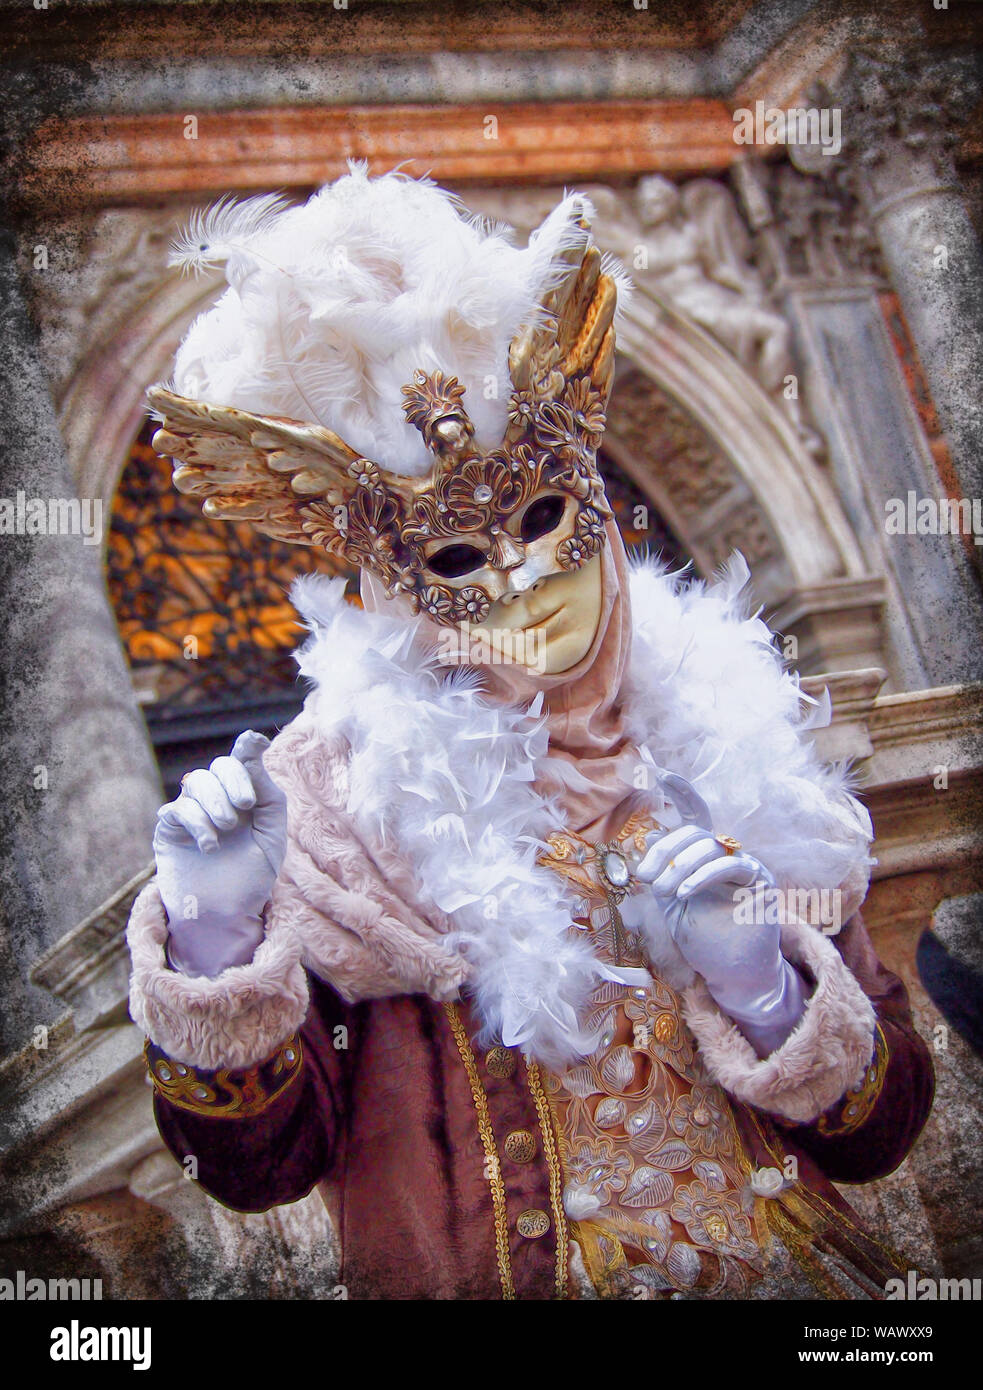 Venice Carnival (Carnevale) takes place in the run up to lent. See the city at its most colourful, with masks, costumes, & opulent masquerade balls. Stock Photo